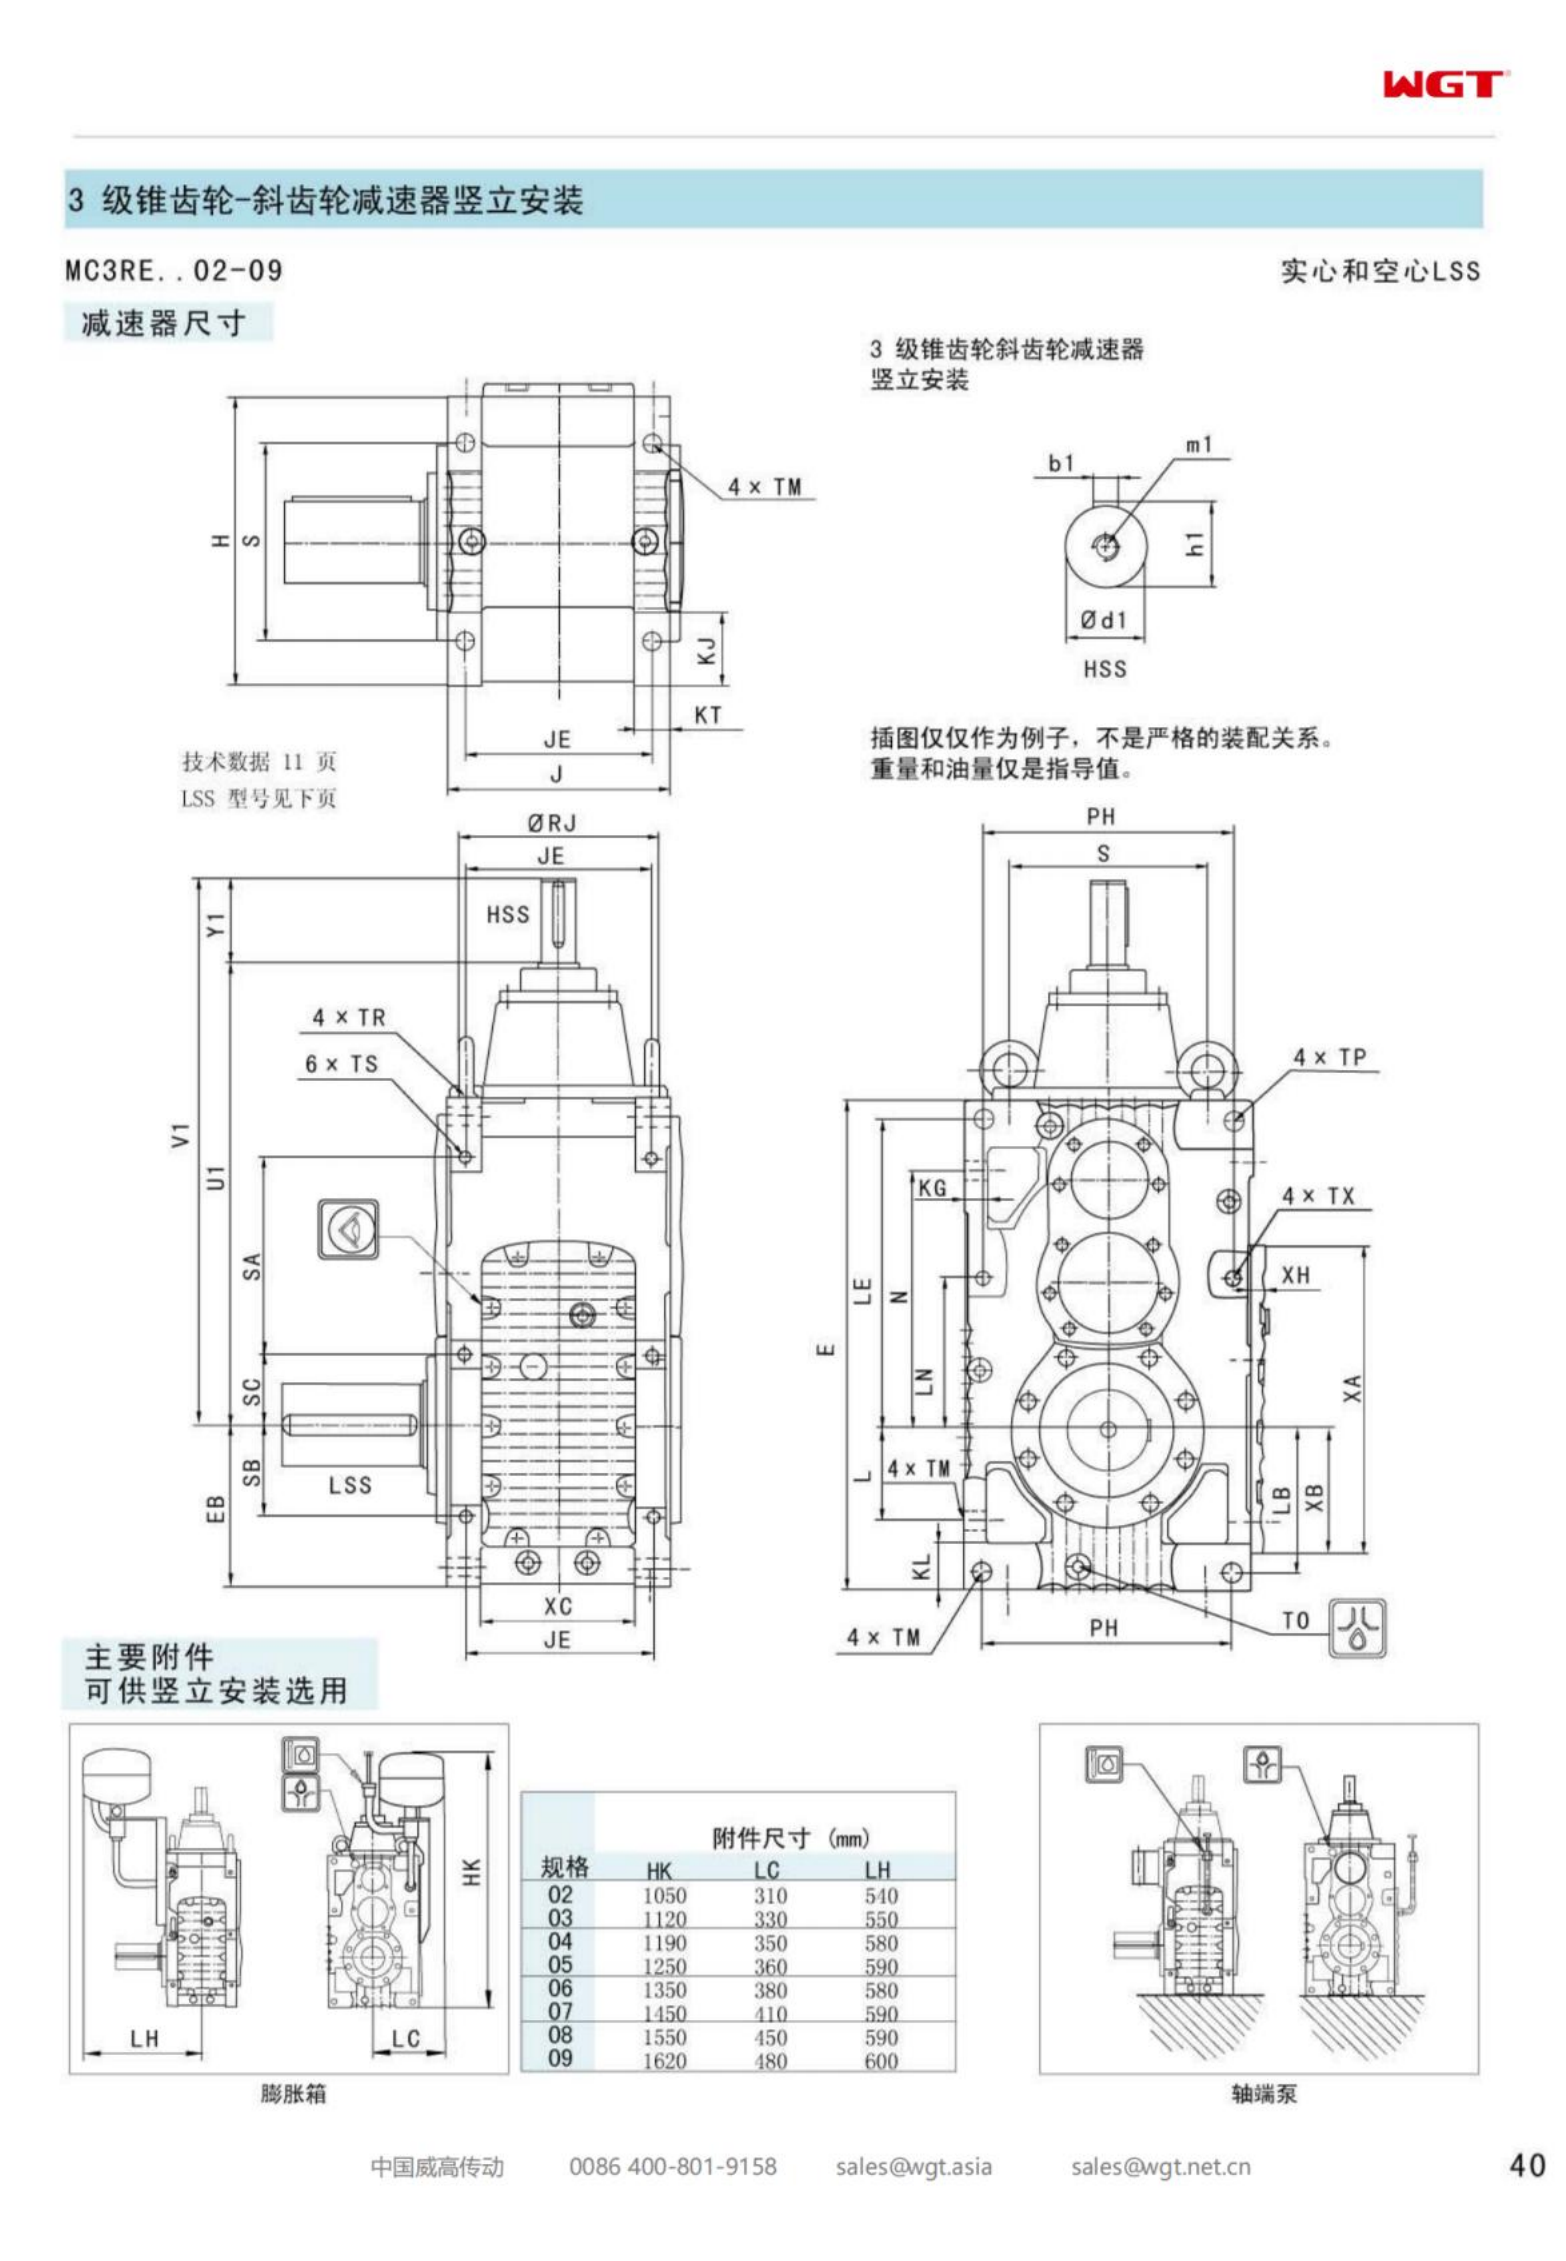 MC3RESF09 Replace_SEW_MC_Series Gearbox